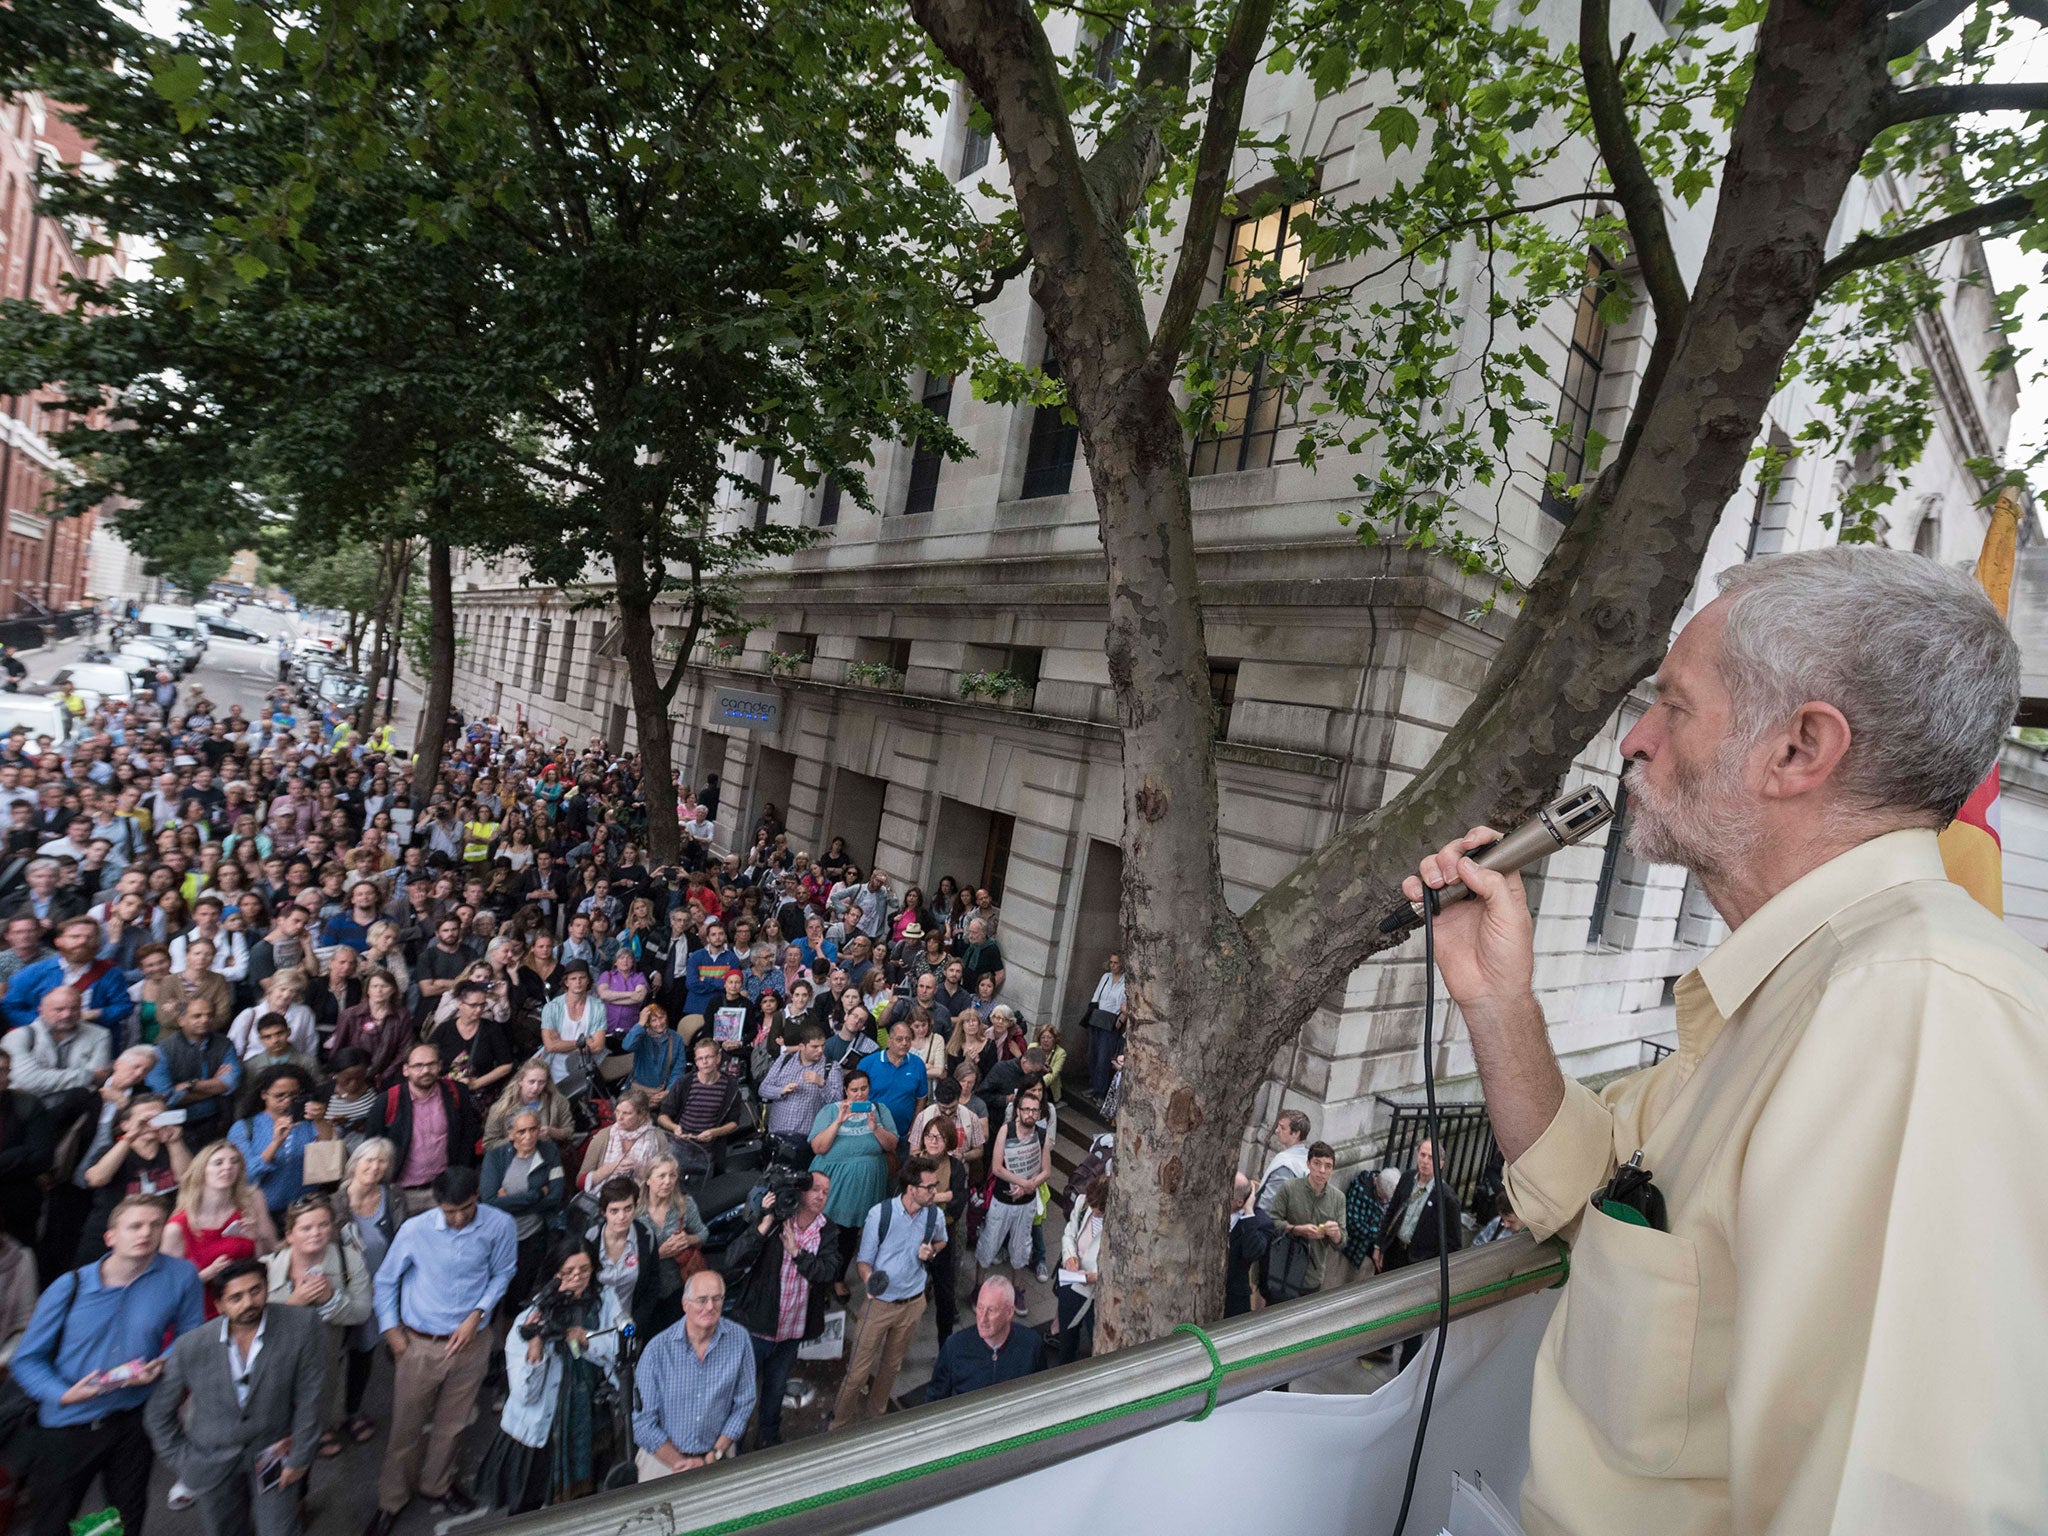 Jeremy Corbyn addresses supporters from the top of a fire engine after one of his rallies spilled into the street